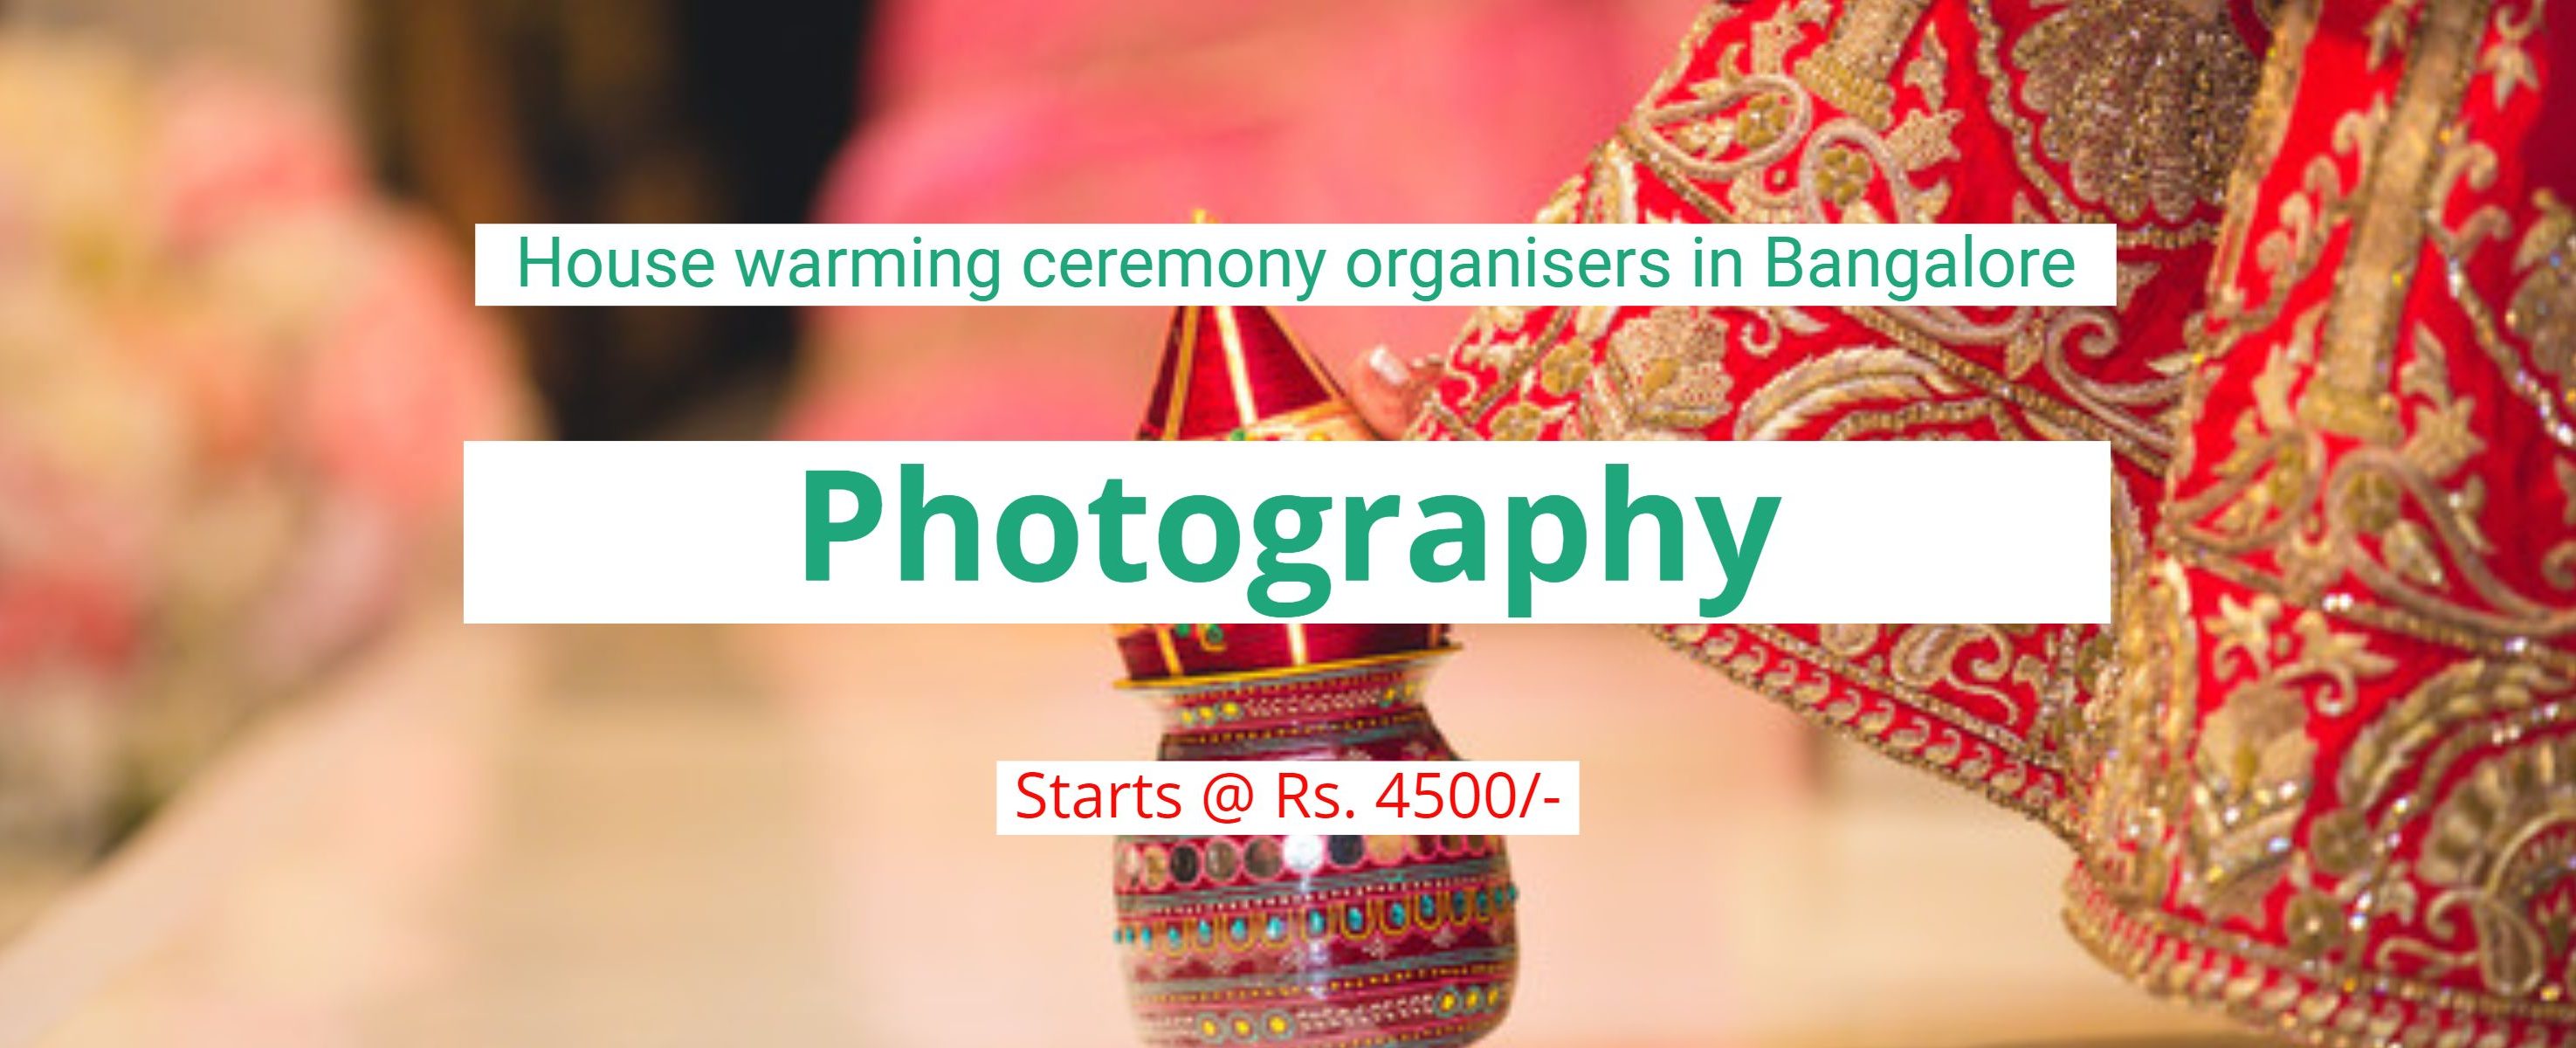 House warming ceremony photography in Bangalore